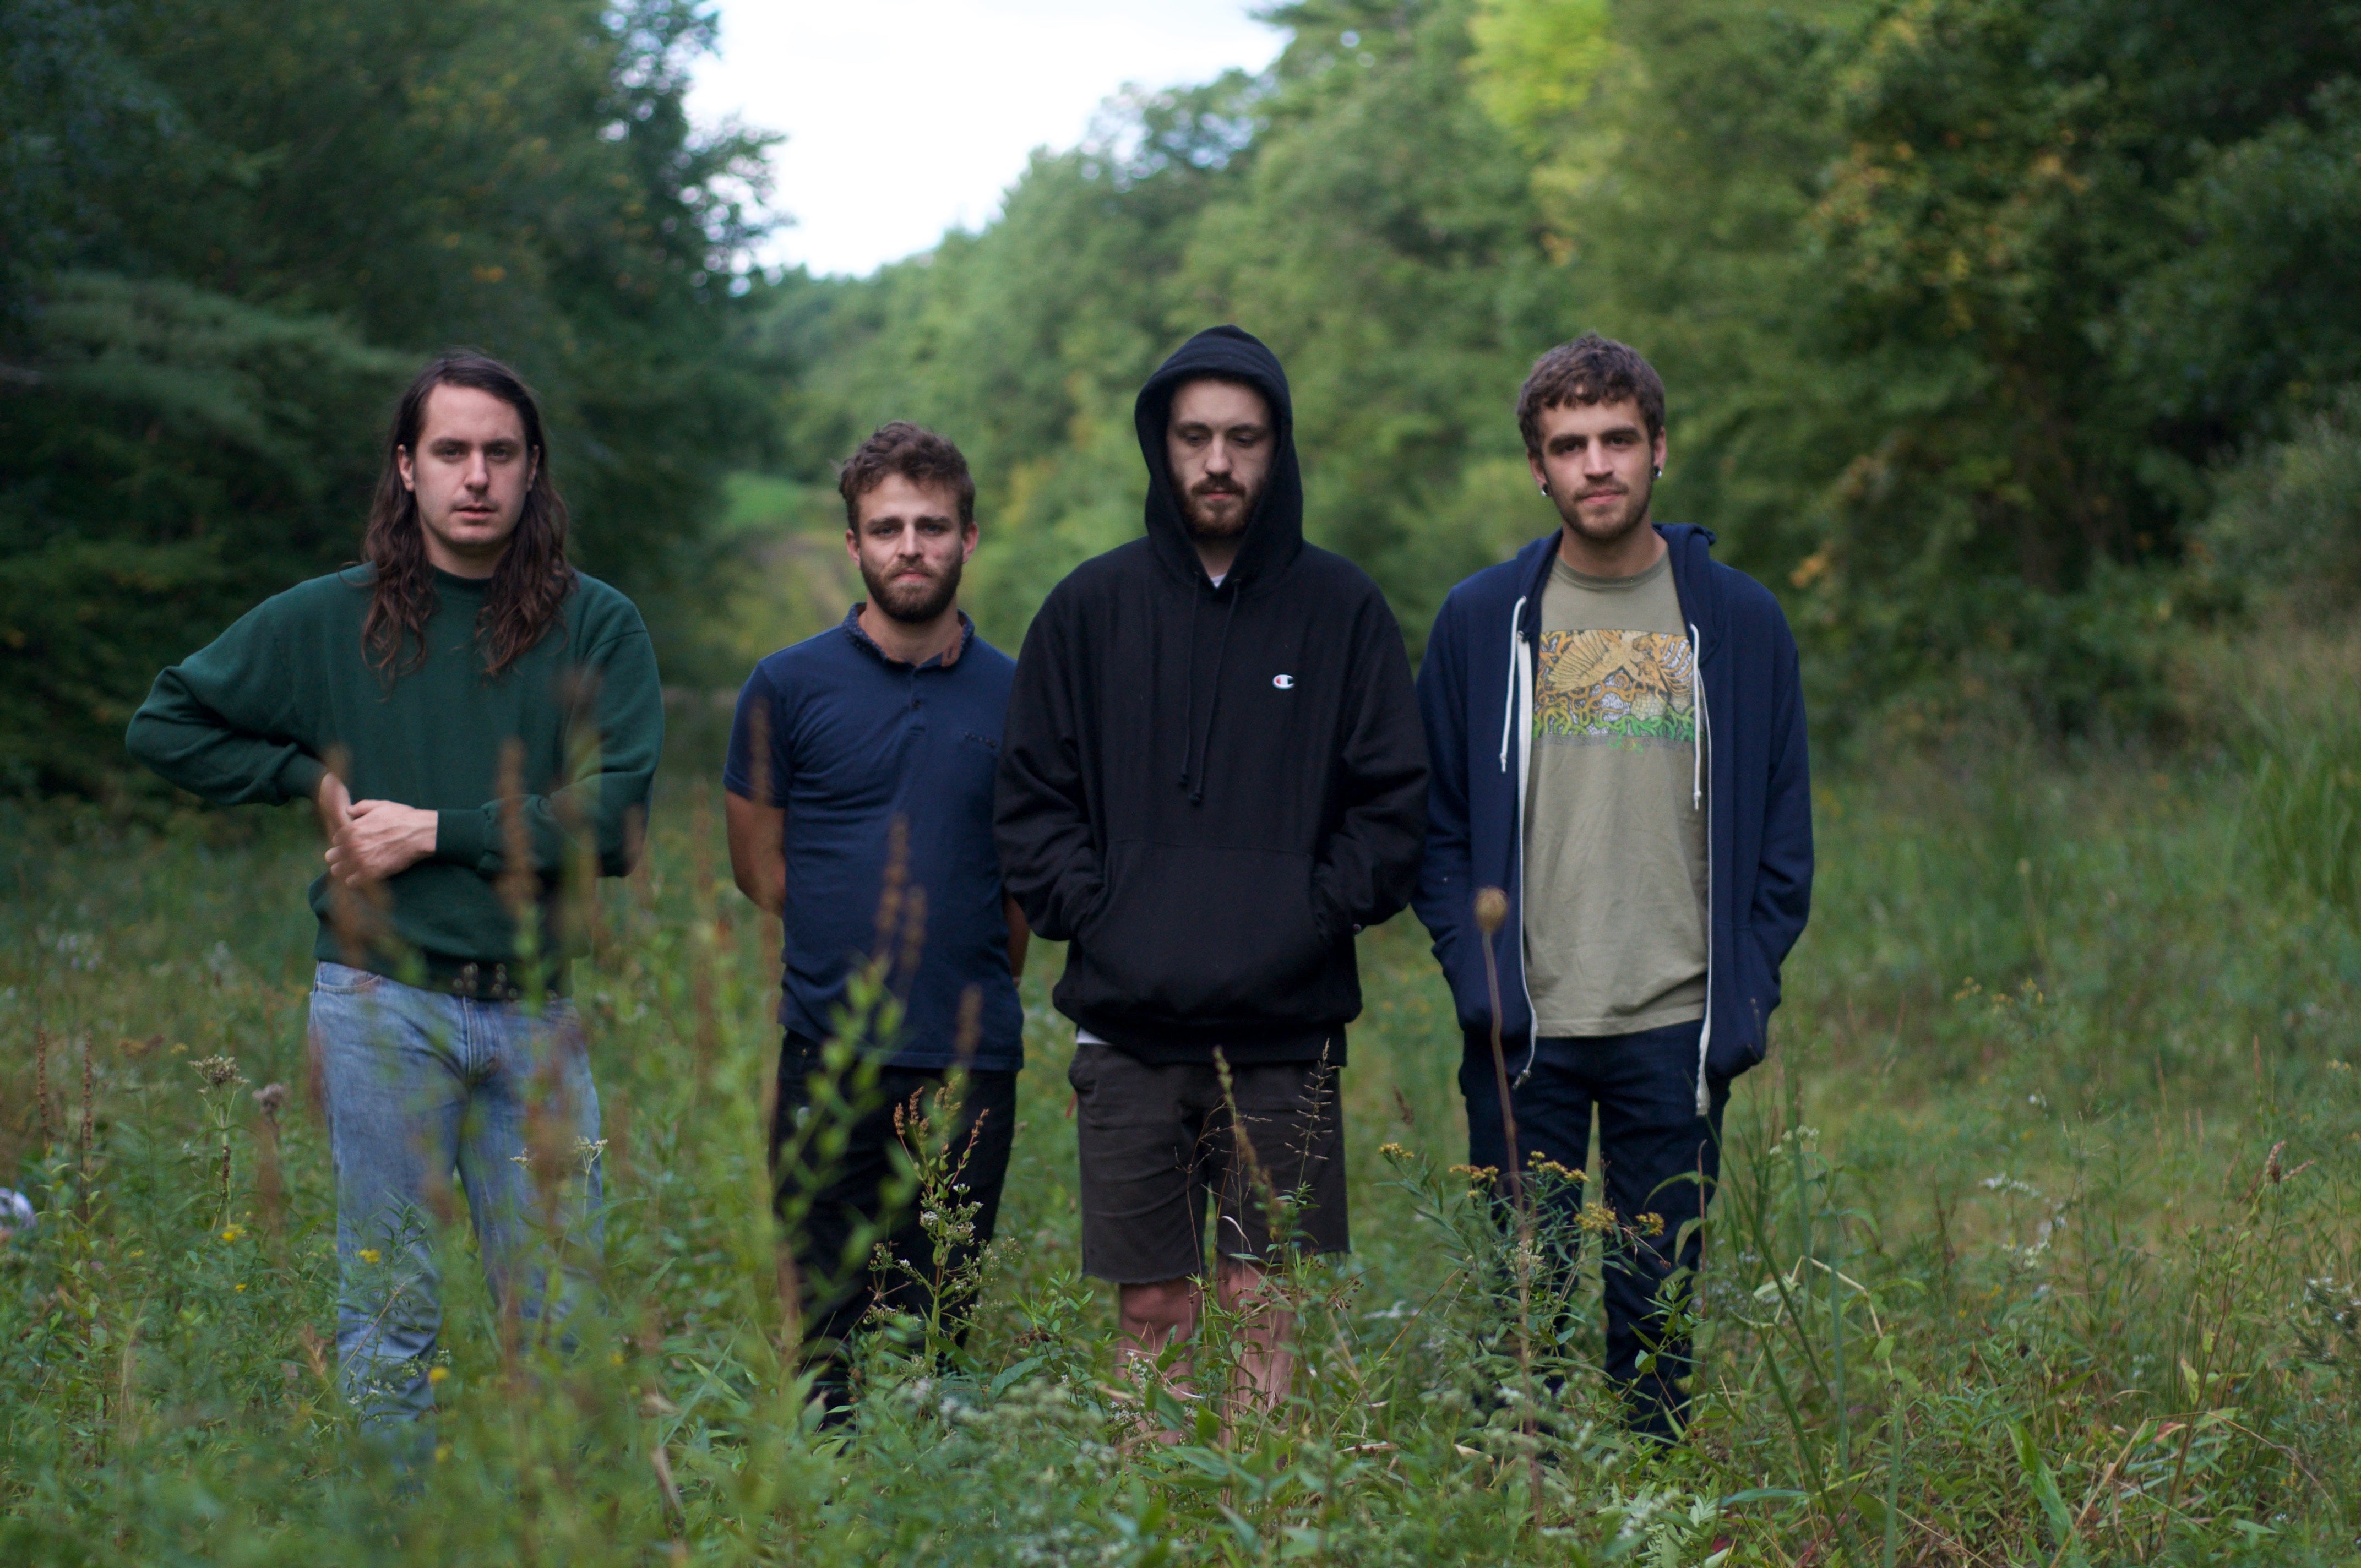 The Hotelier + Foxing - MOVED TO BELASCO in Los Angeles promo photo for Artist presale offer code